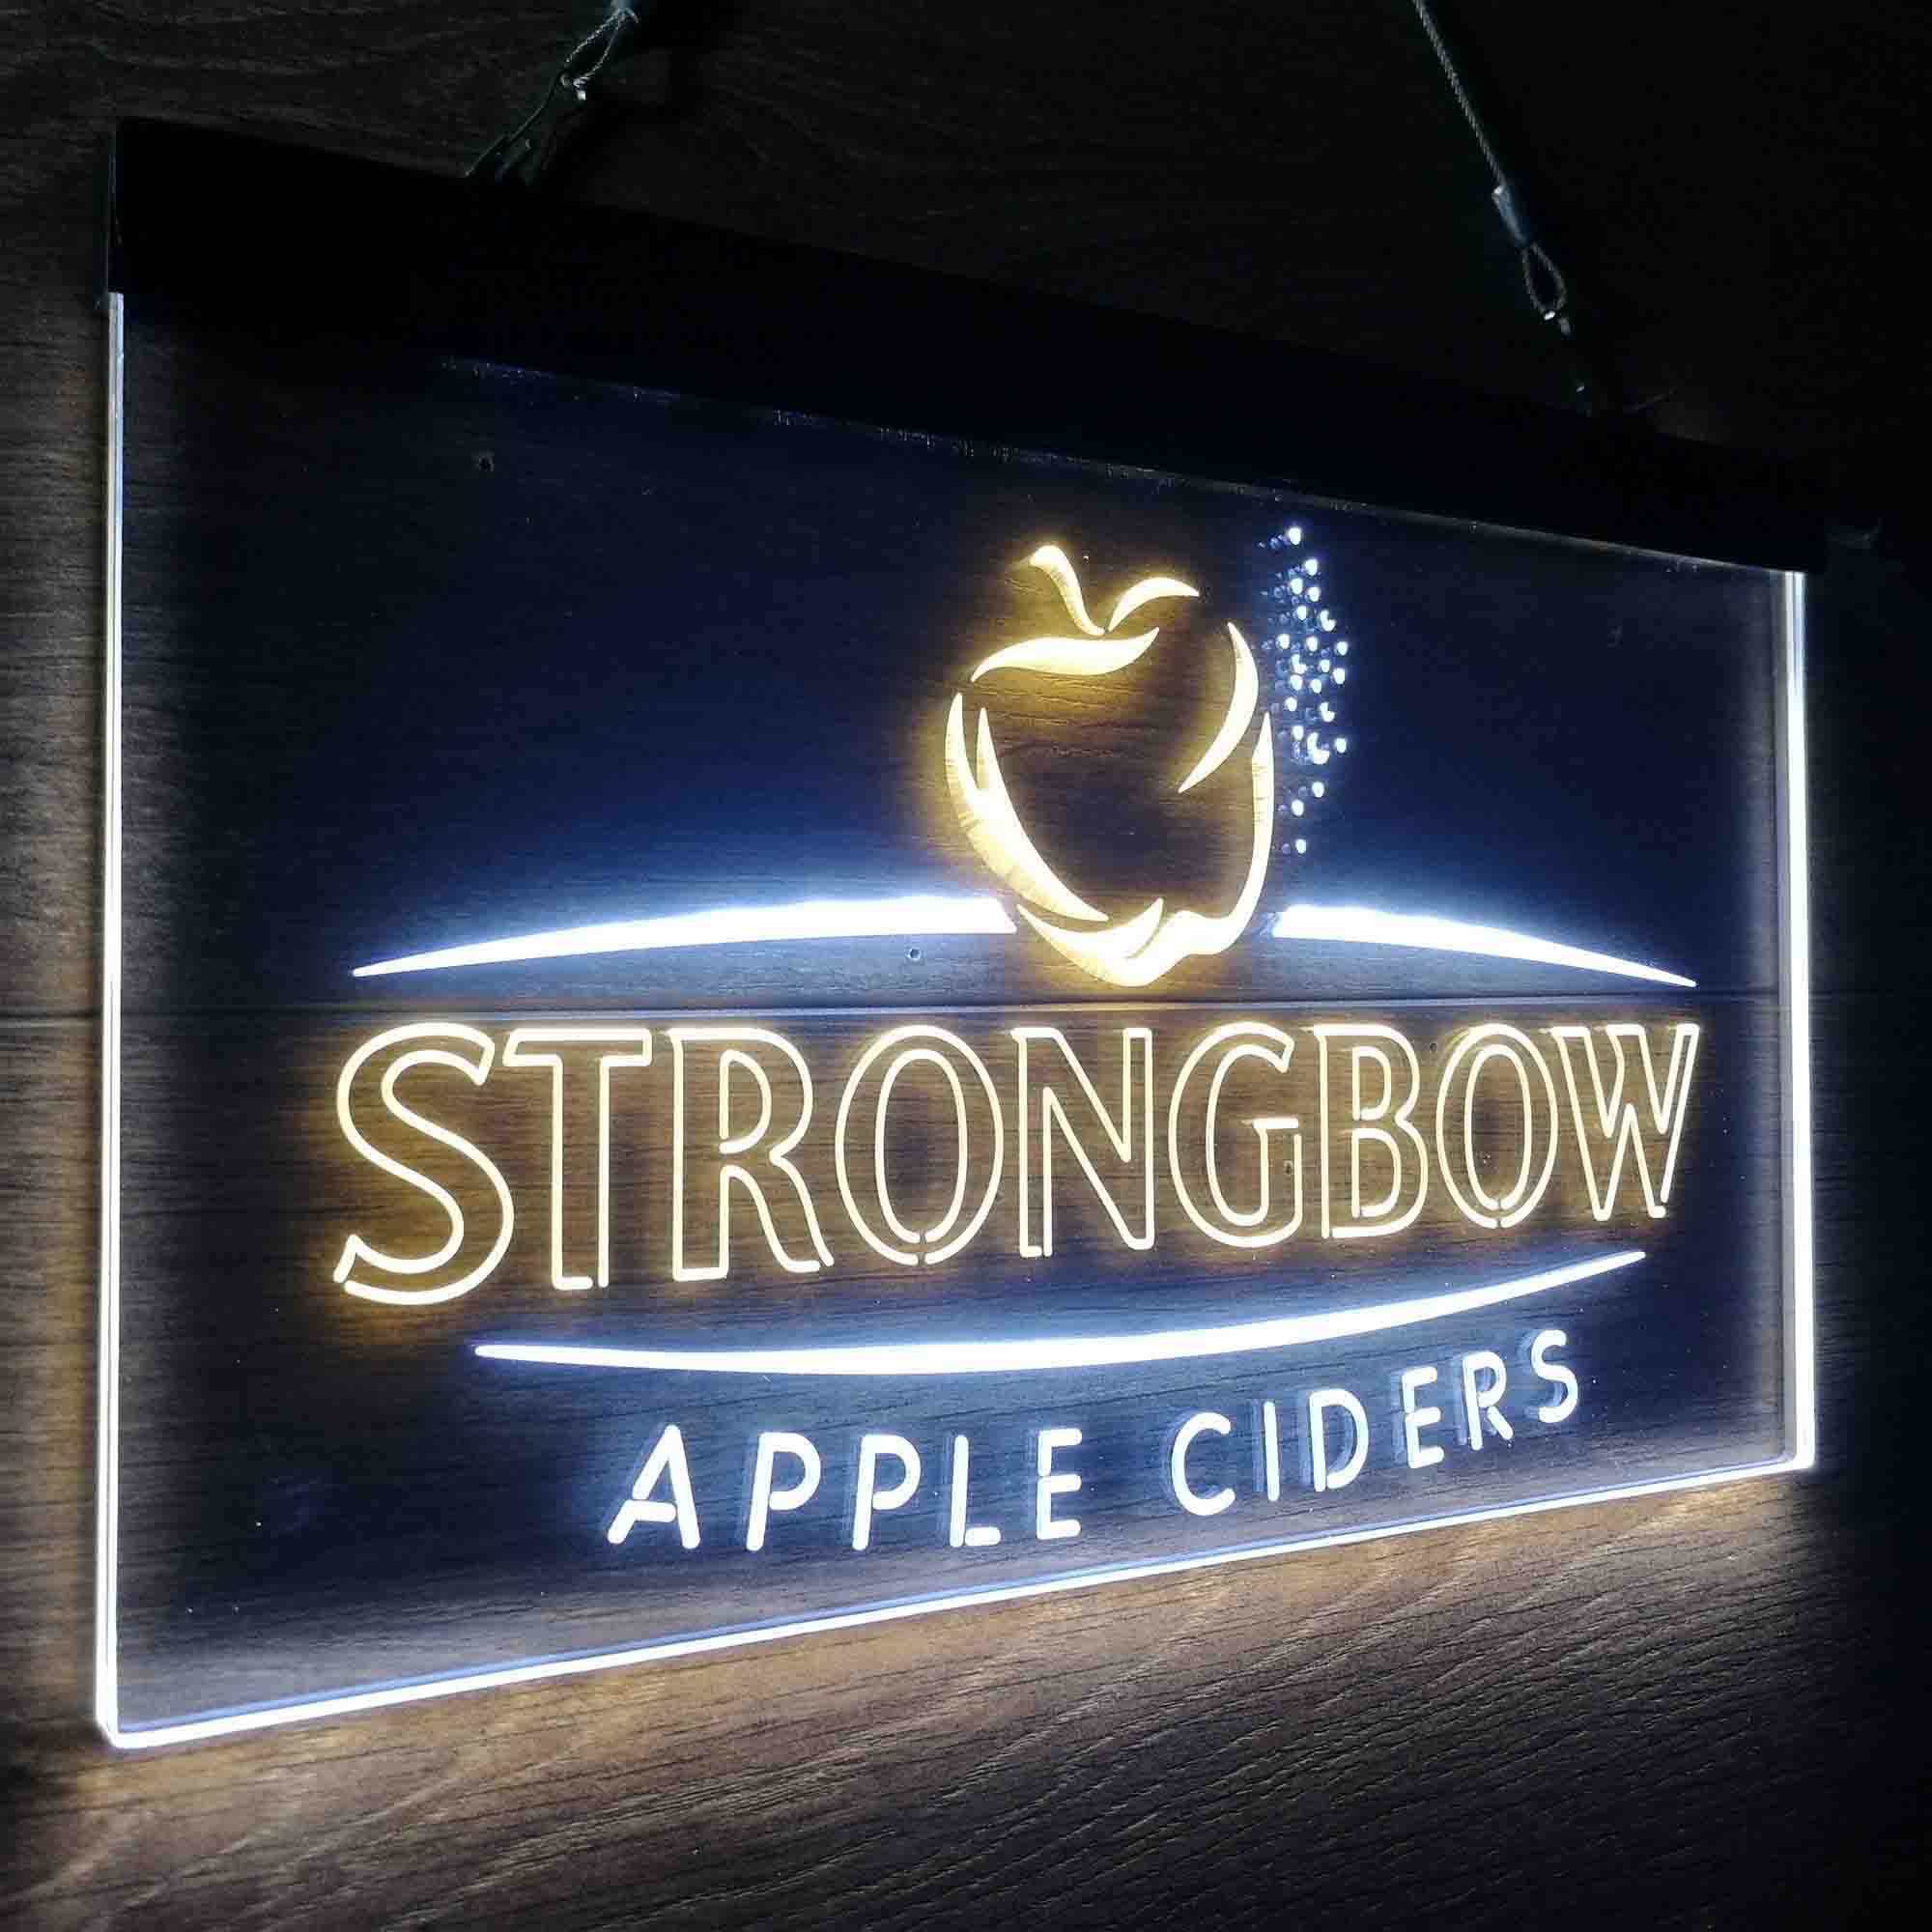 Strongbow Apple Ciders Neon-Like LED Sign